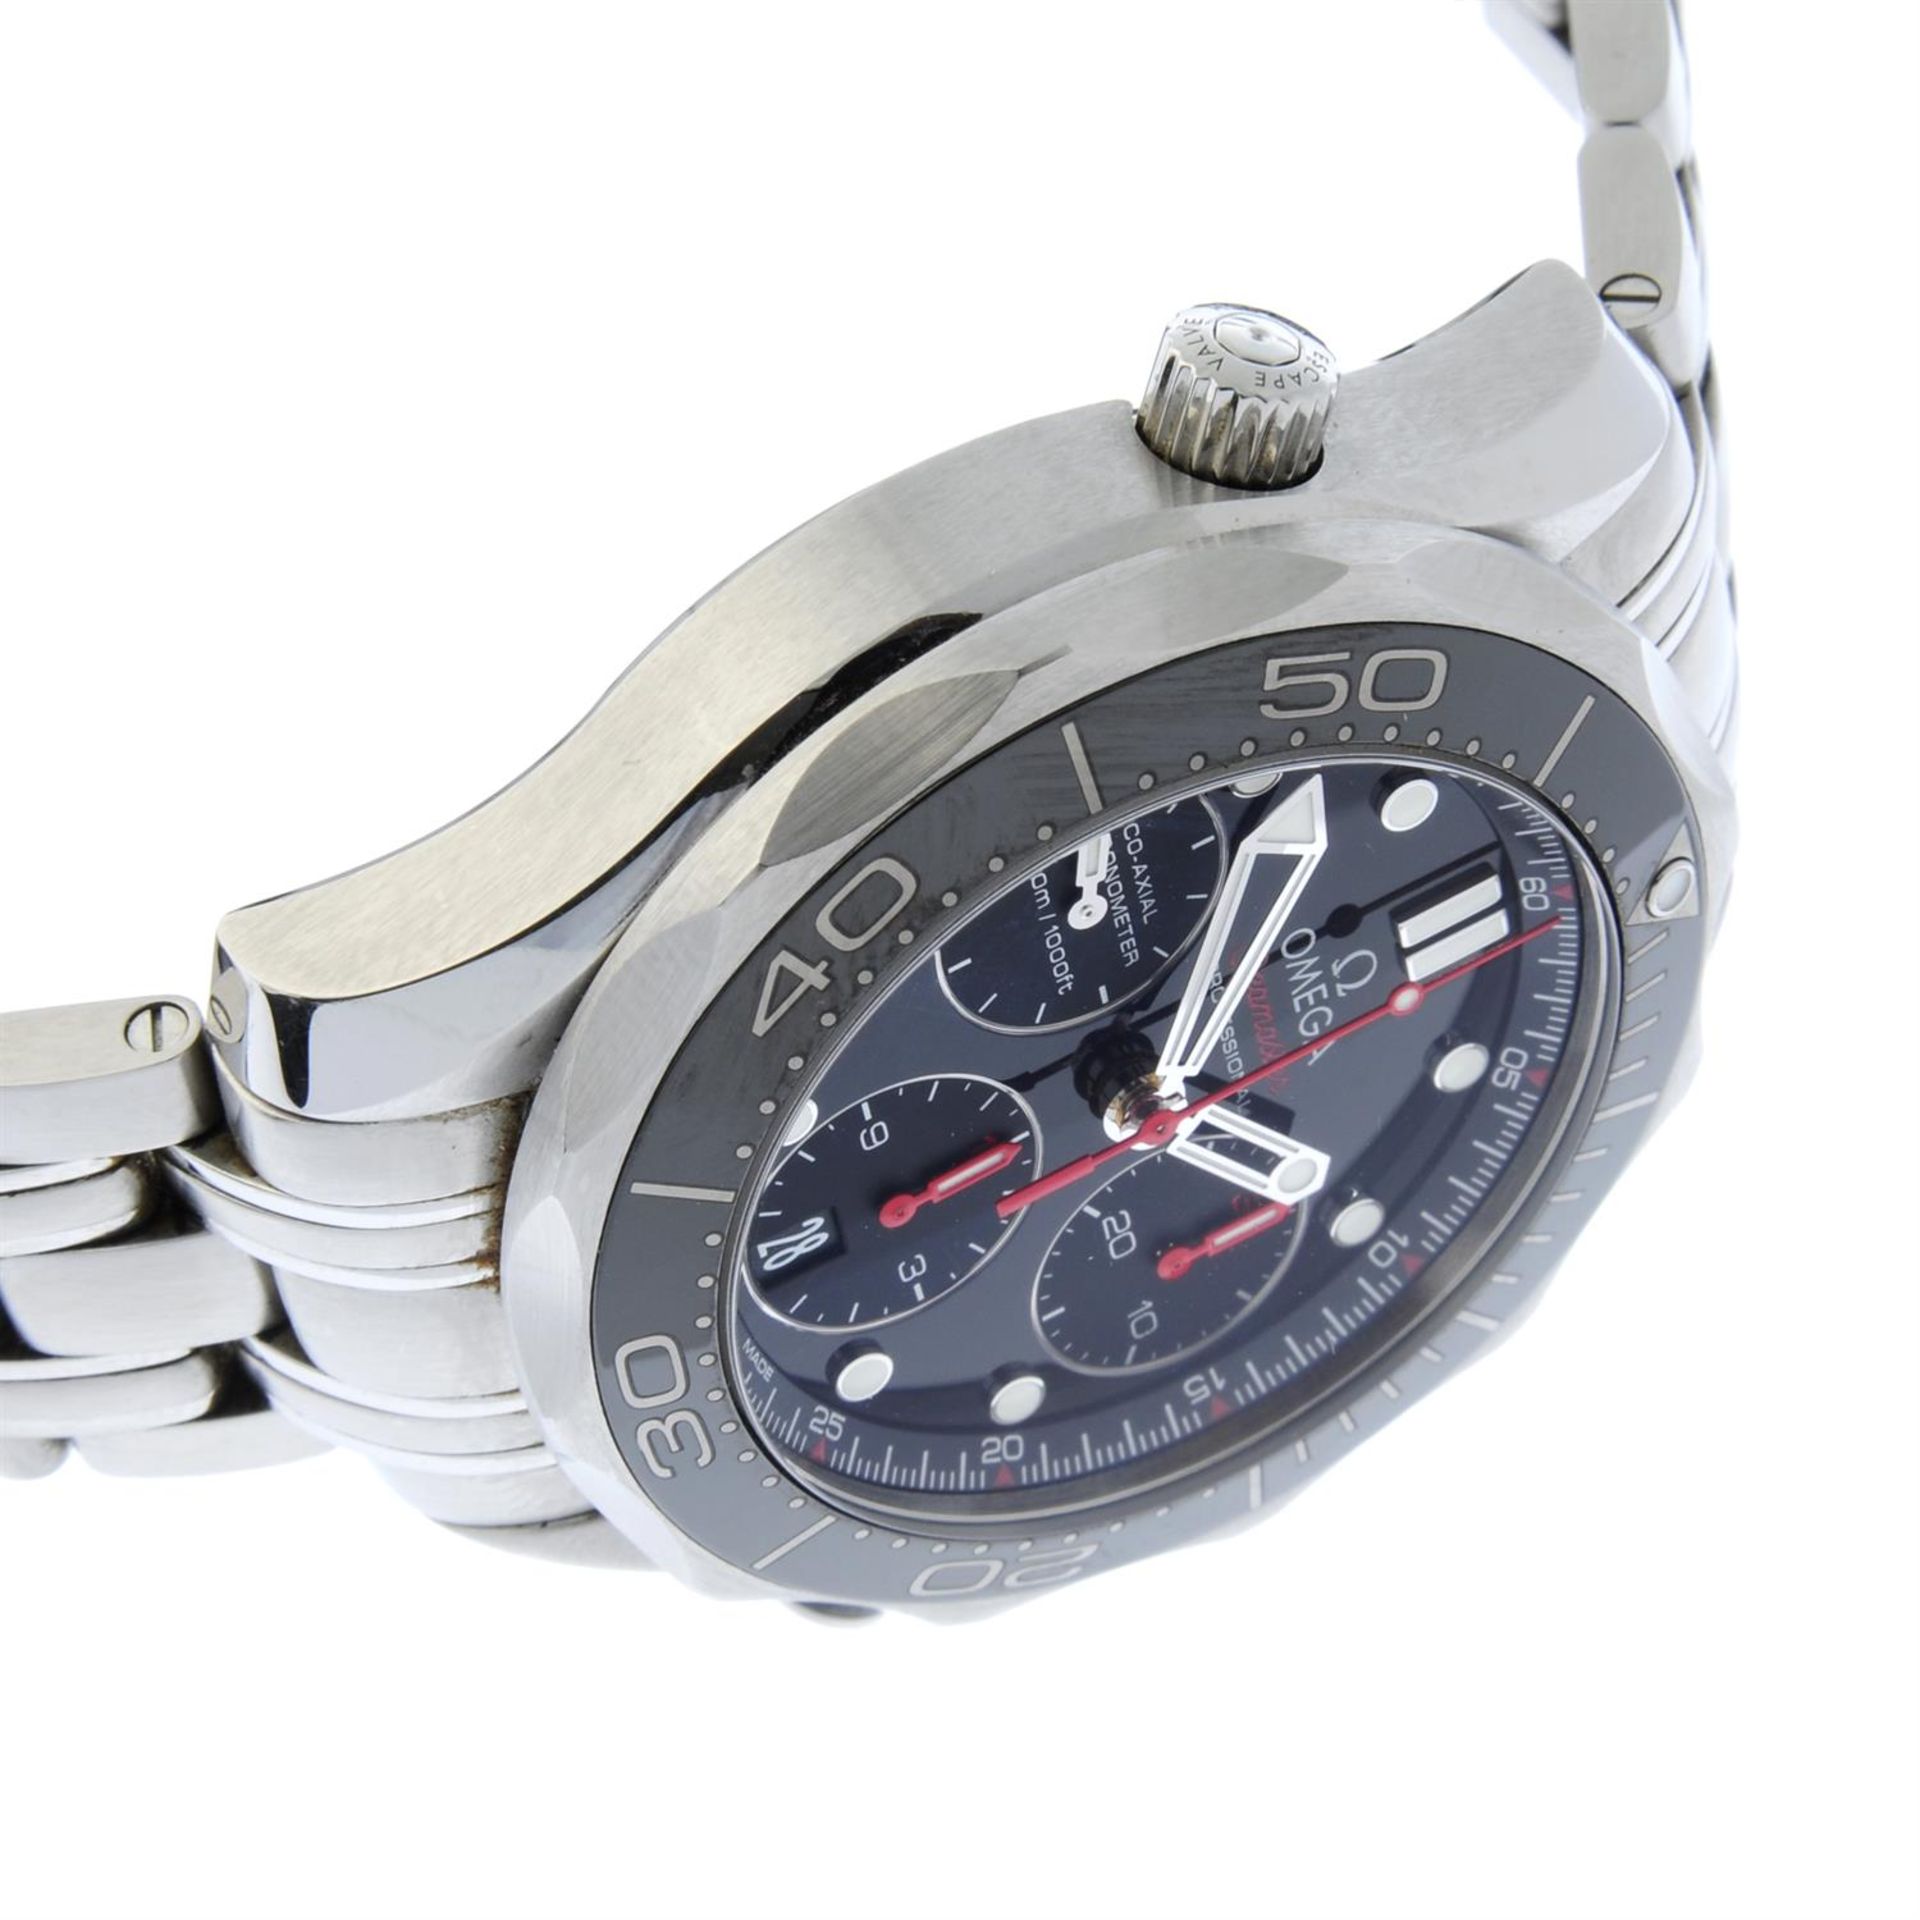 OMEGA - a stainless steel Seamaster Professional Diver 300M Co-Axial chronograph bracelet watch, - Image 4 of 7